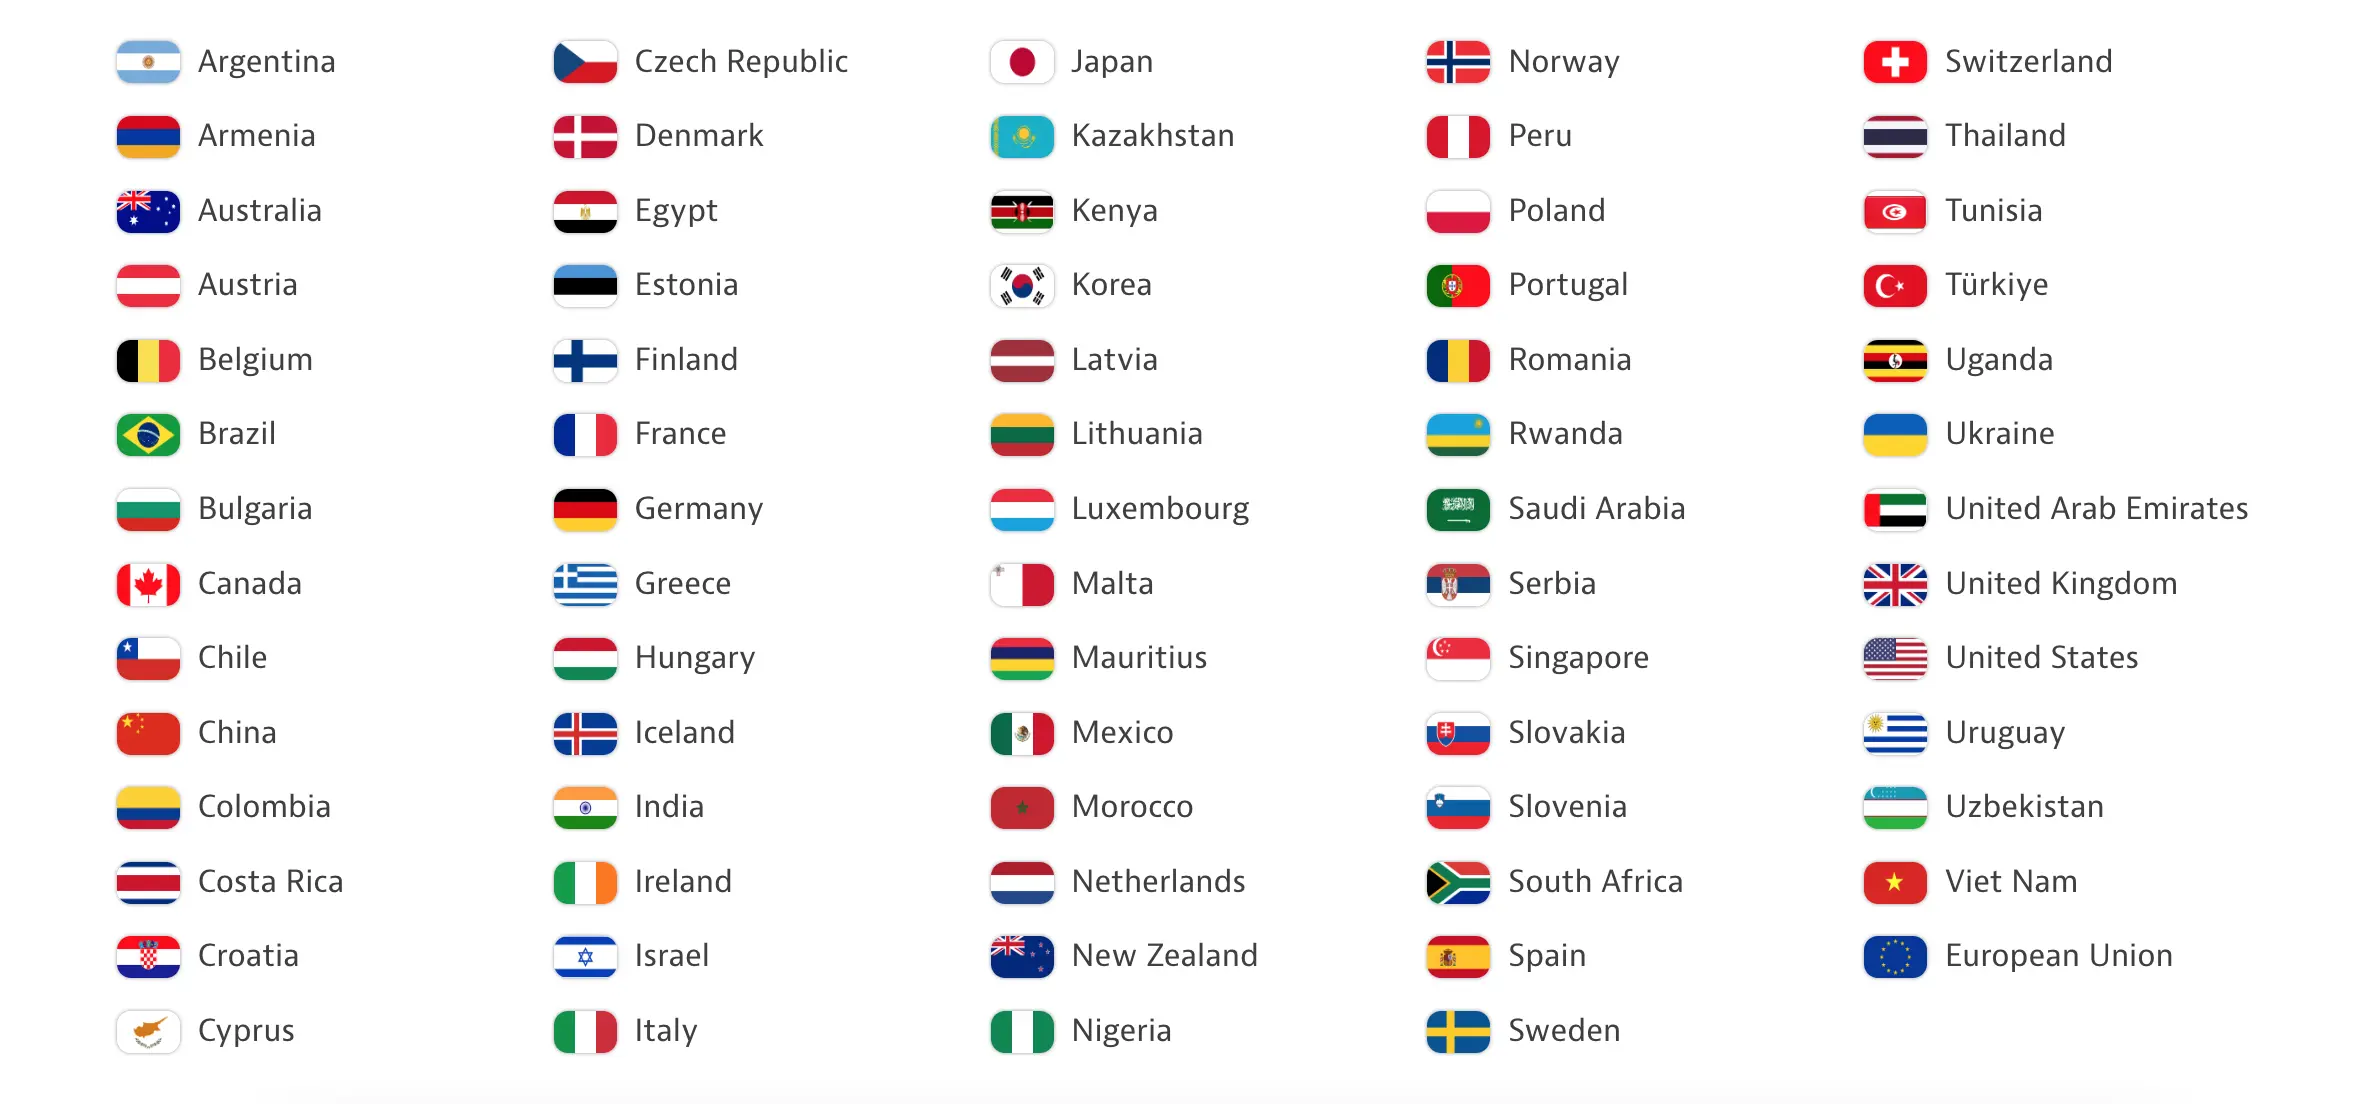 60 countries, indicating that they have already adopted AI regulations